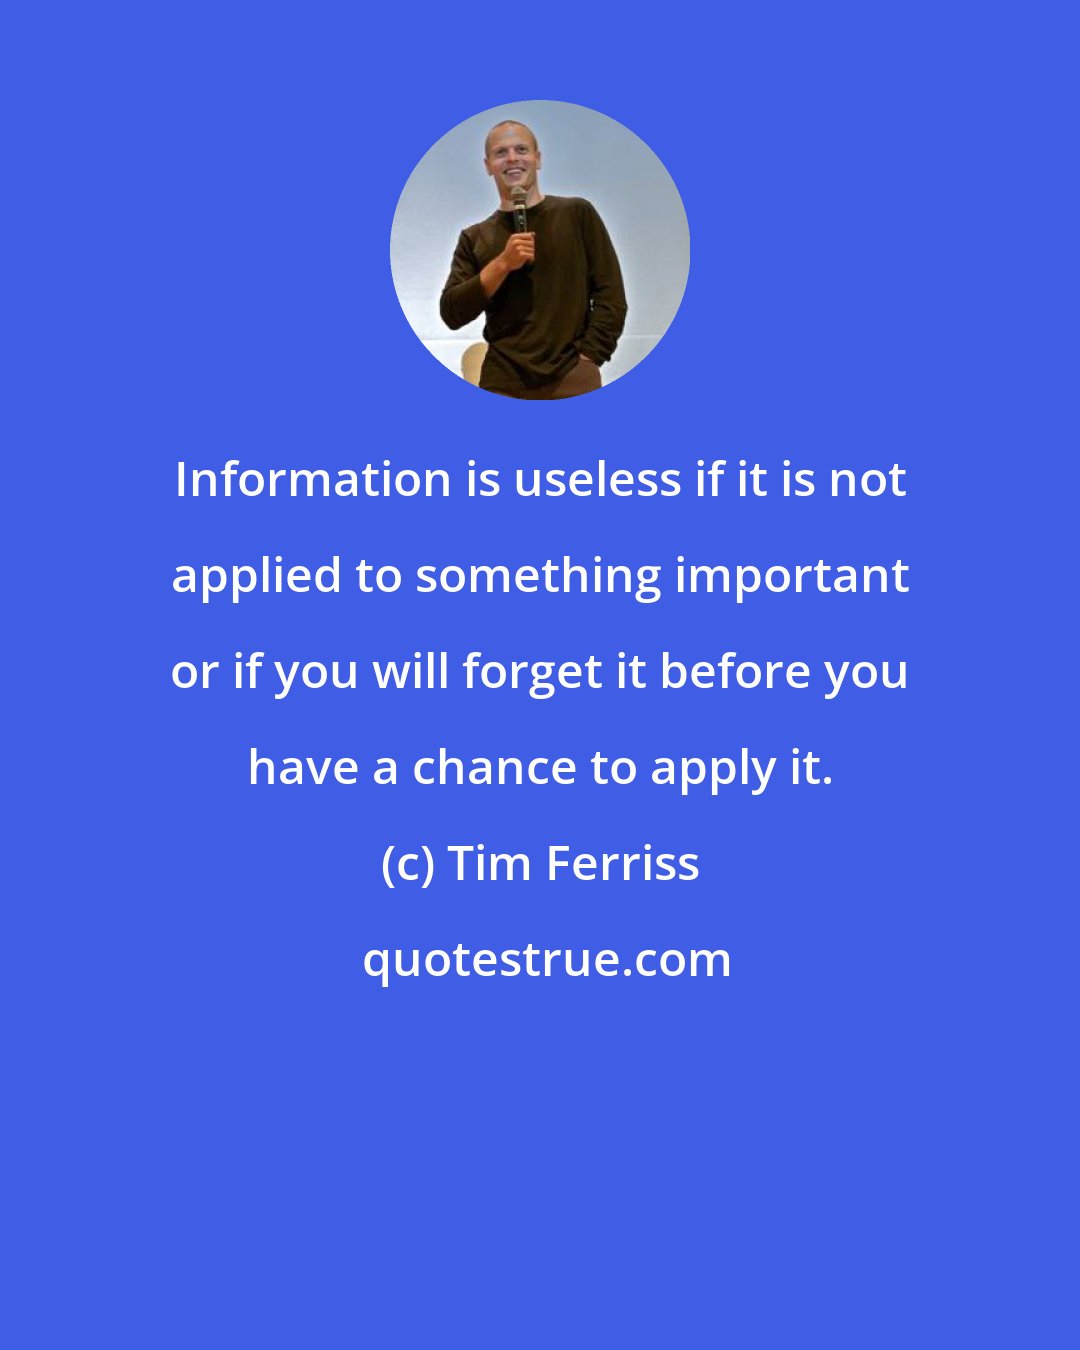 Tim Ferriss: Information is useless if it is not applied to something important or if you will forget it before you have a chance to apply it.